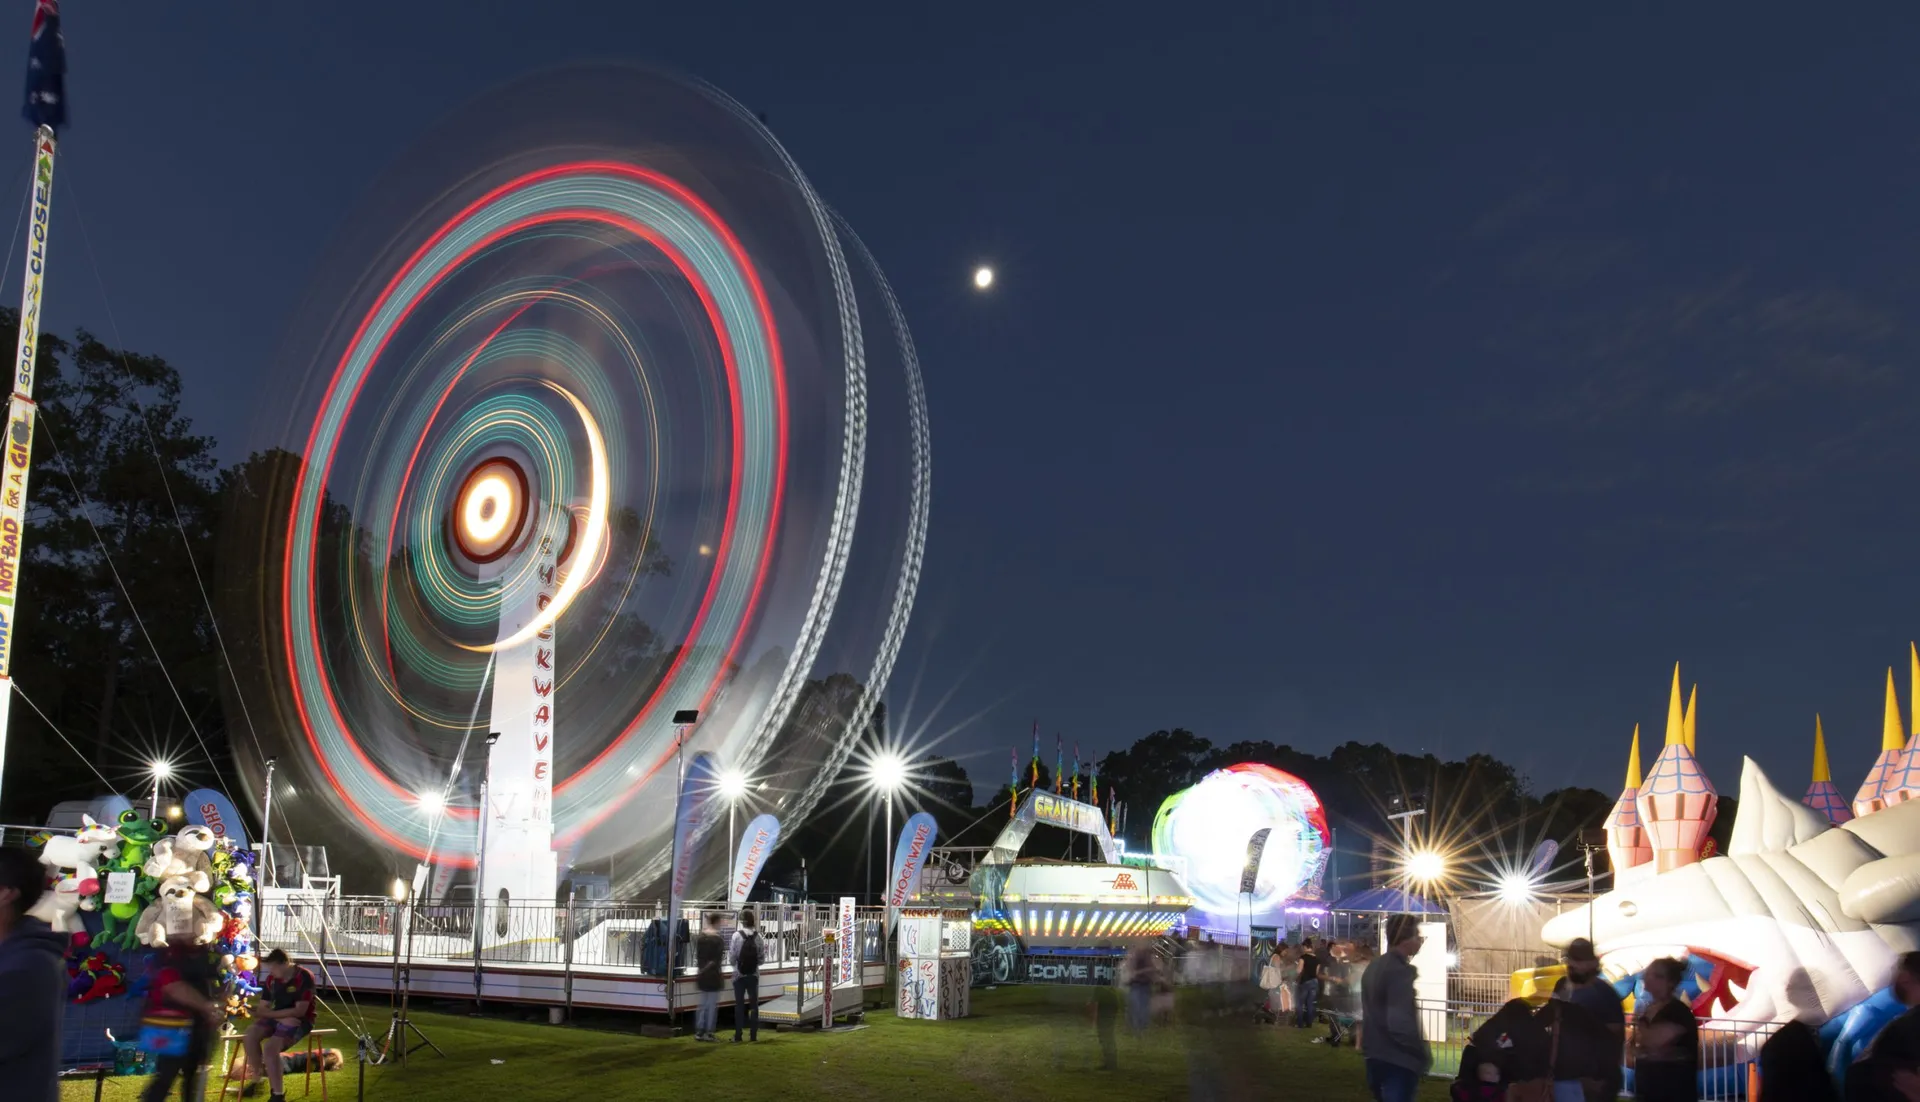 Sunshine-Coast-Agricultural-Show_Ferris-wheel-spinning-at-night-scaled.jpg